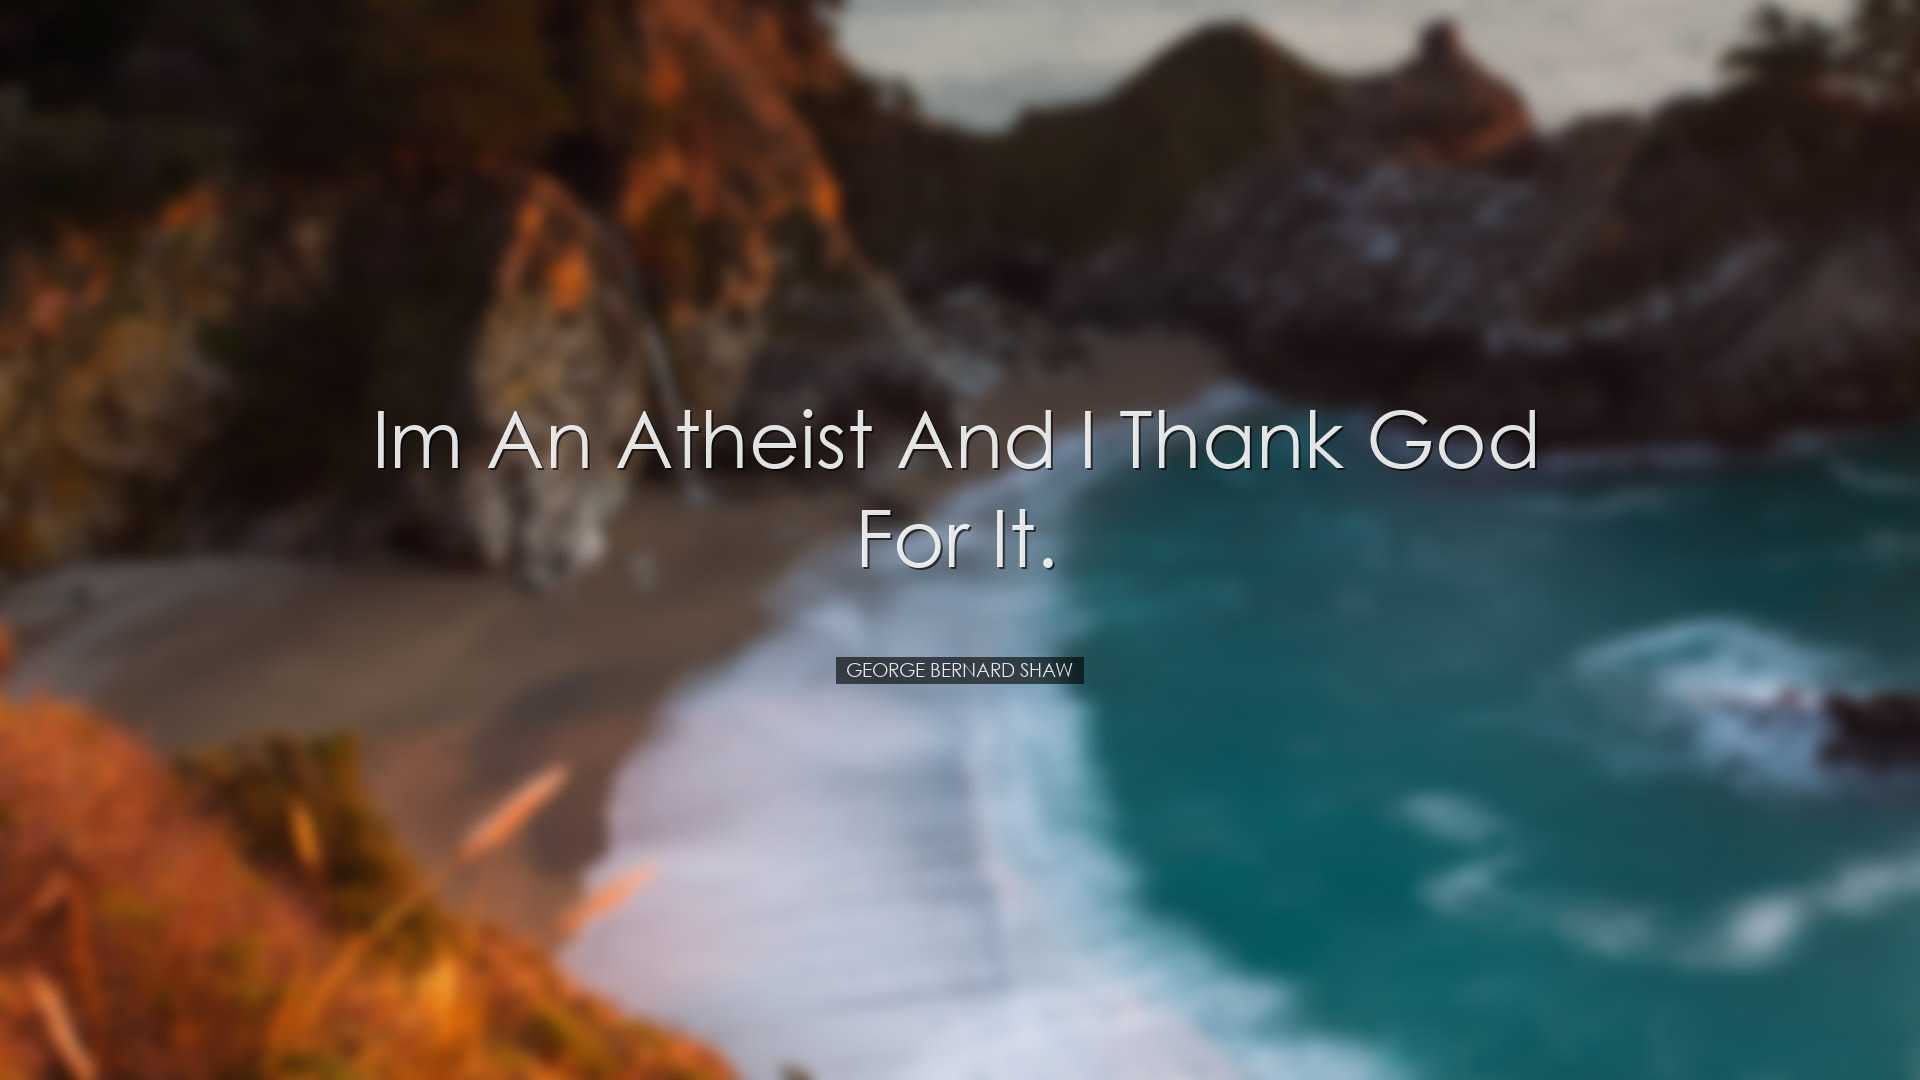 Im an atheist and I thank God for it. - George Bernard Shaw